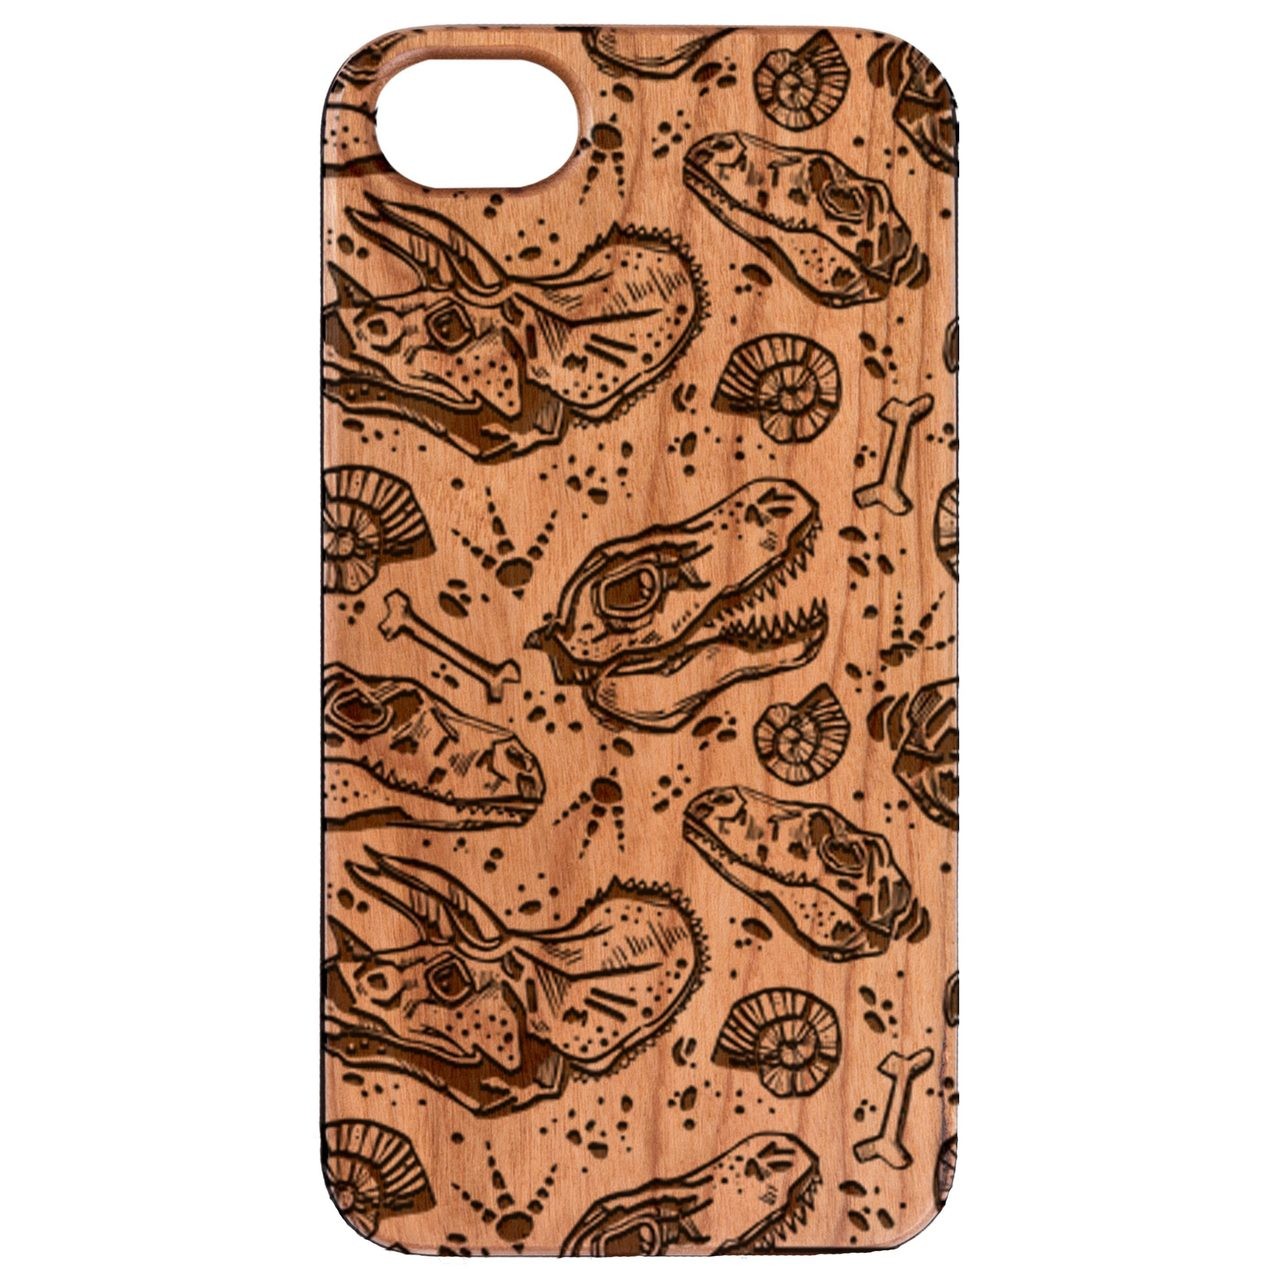  Dinosaur Fossil - Engraved - Wooden Phone Case - IPhone 13 Models